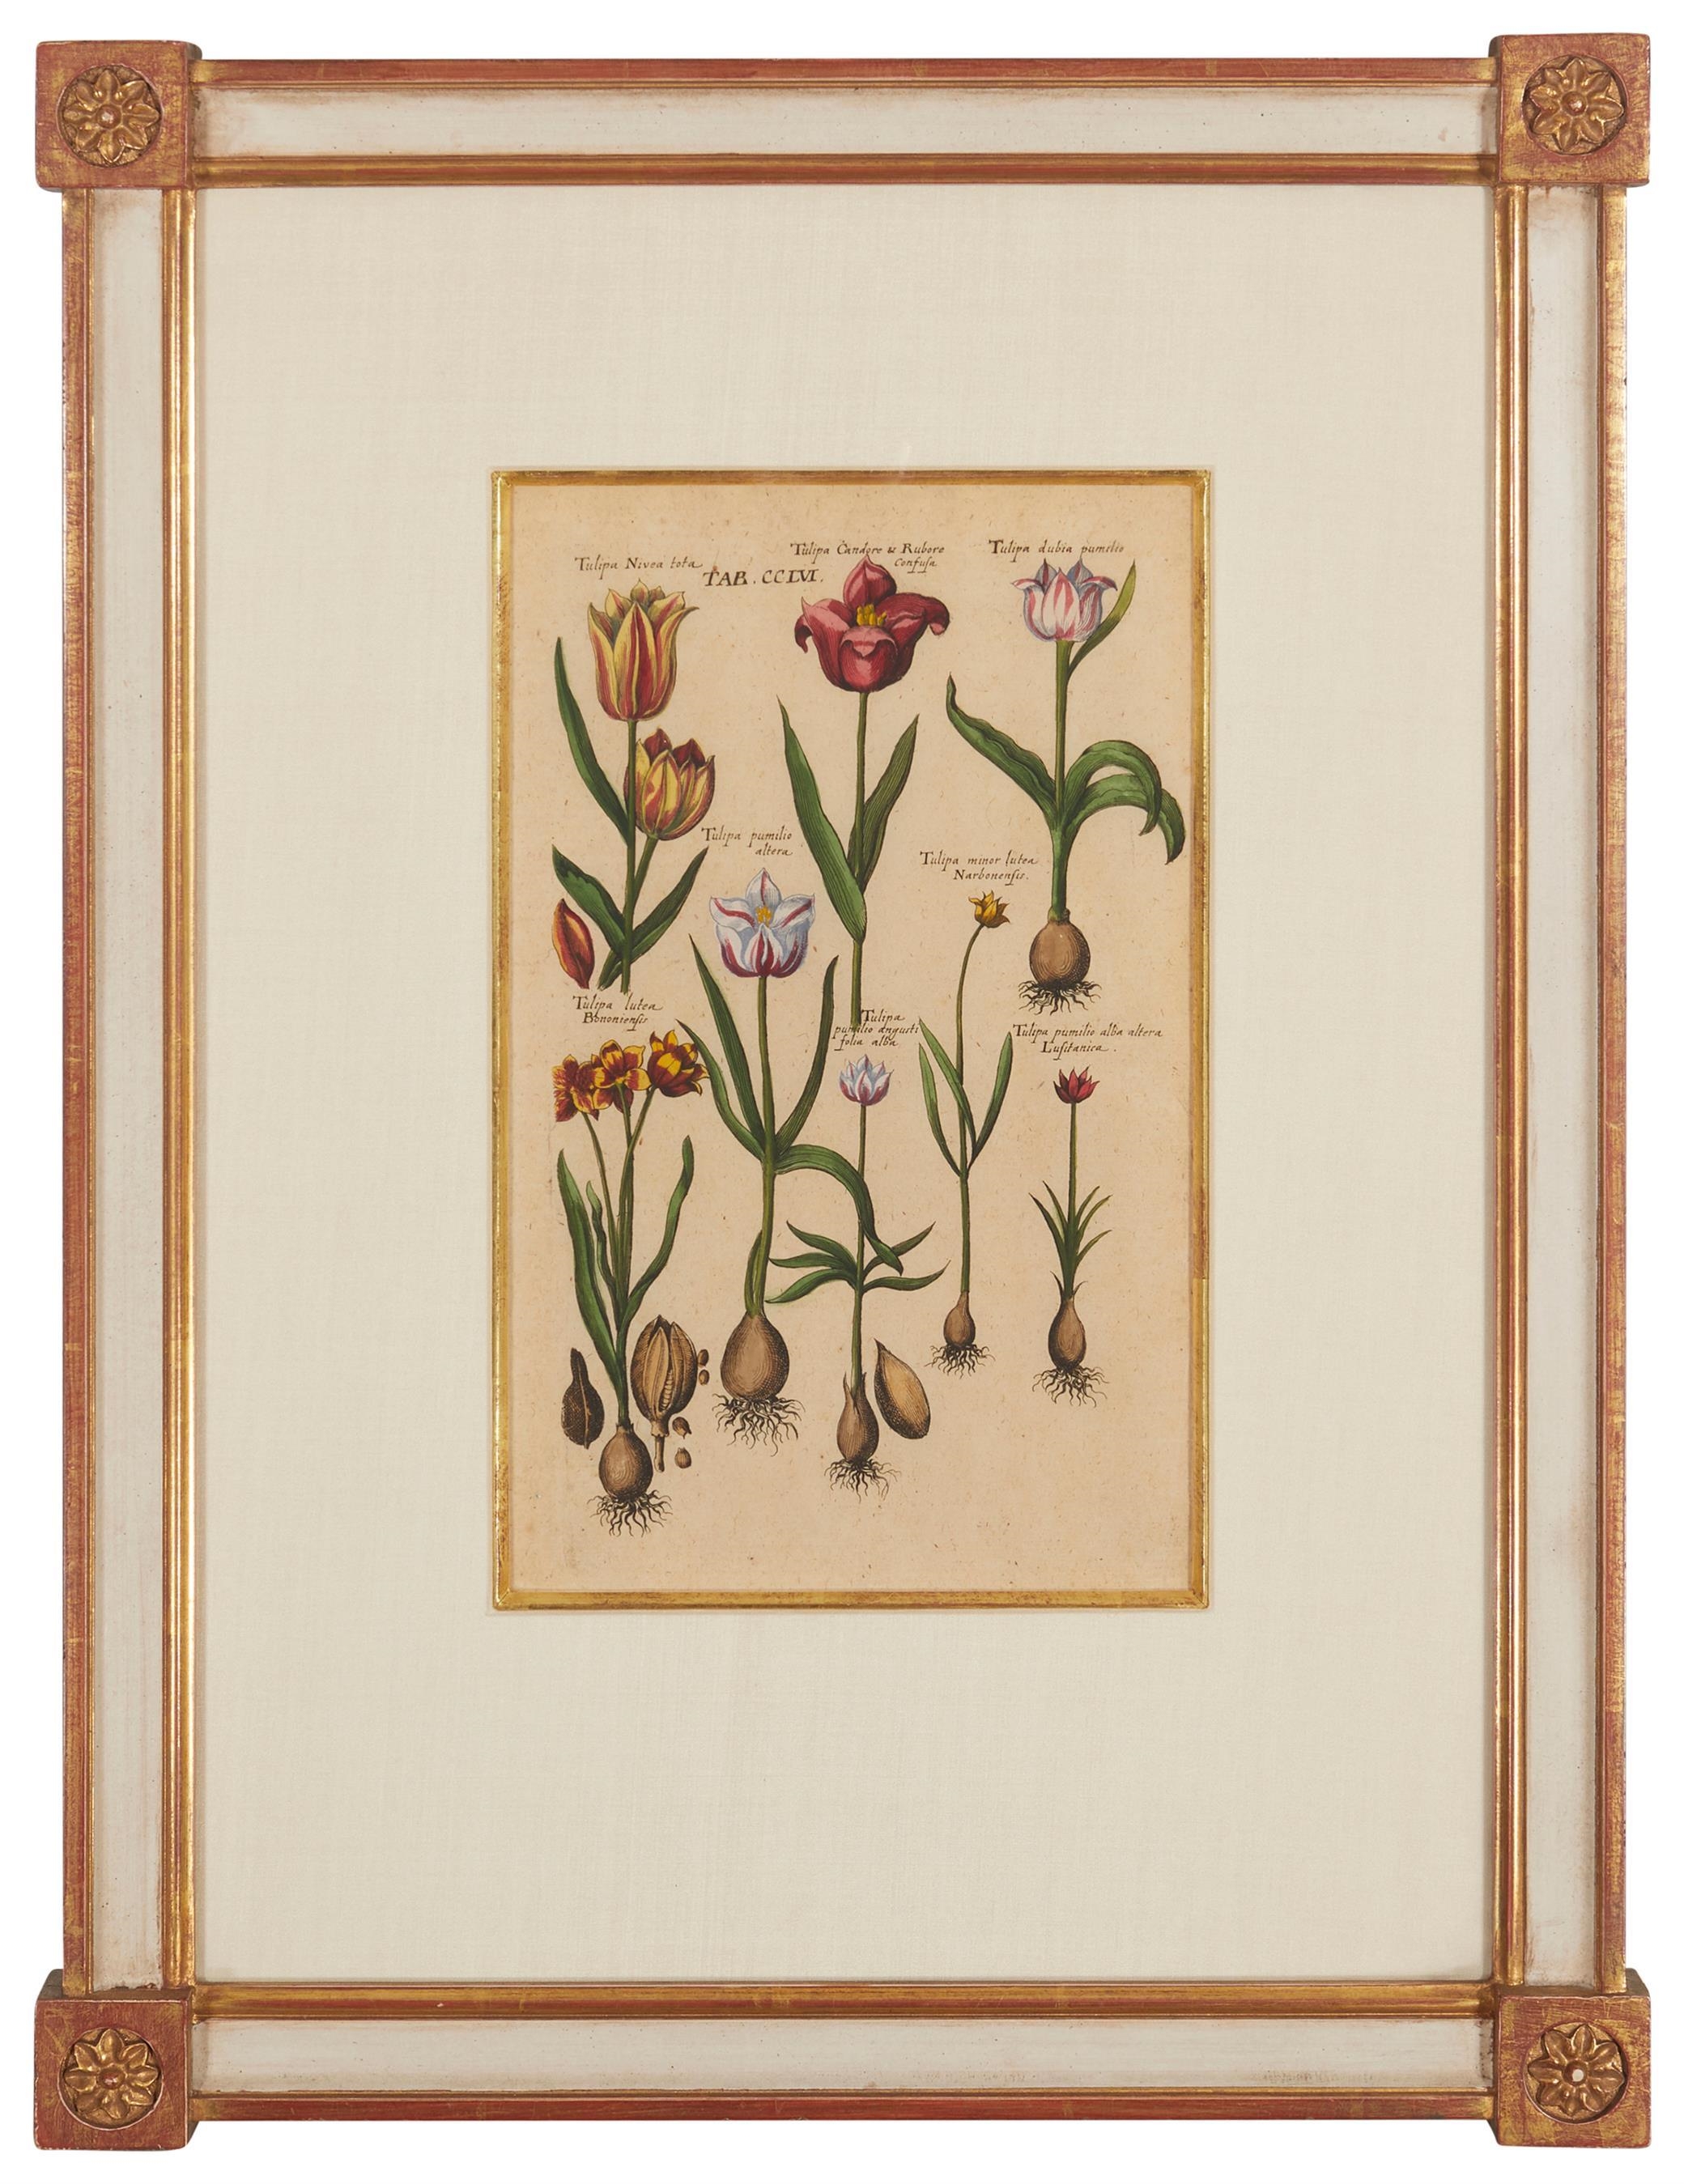 Artwork by Johann Theodor De Bry, "Paonia...;" "Come...;" Tulipa...;" and Fritillaria...,", Made of Engravings with hand coloring